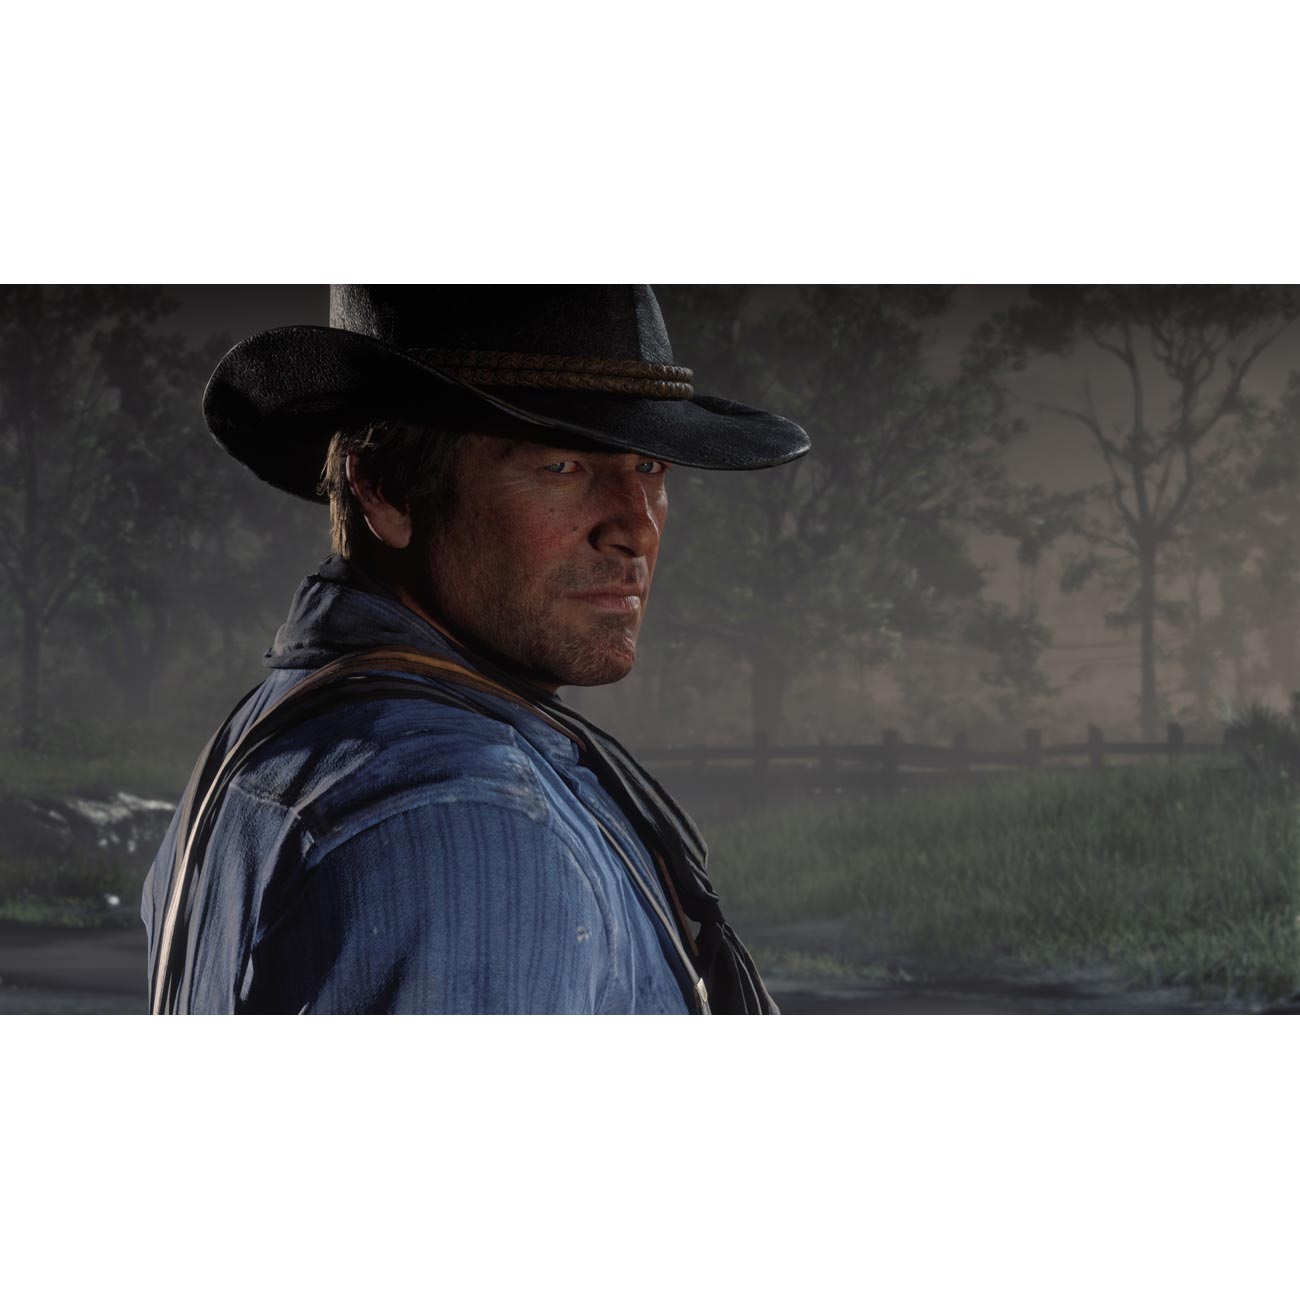 Red Dead Redemption 2 – Ultimate Edition